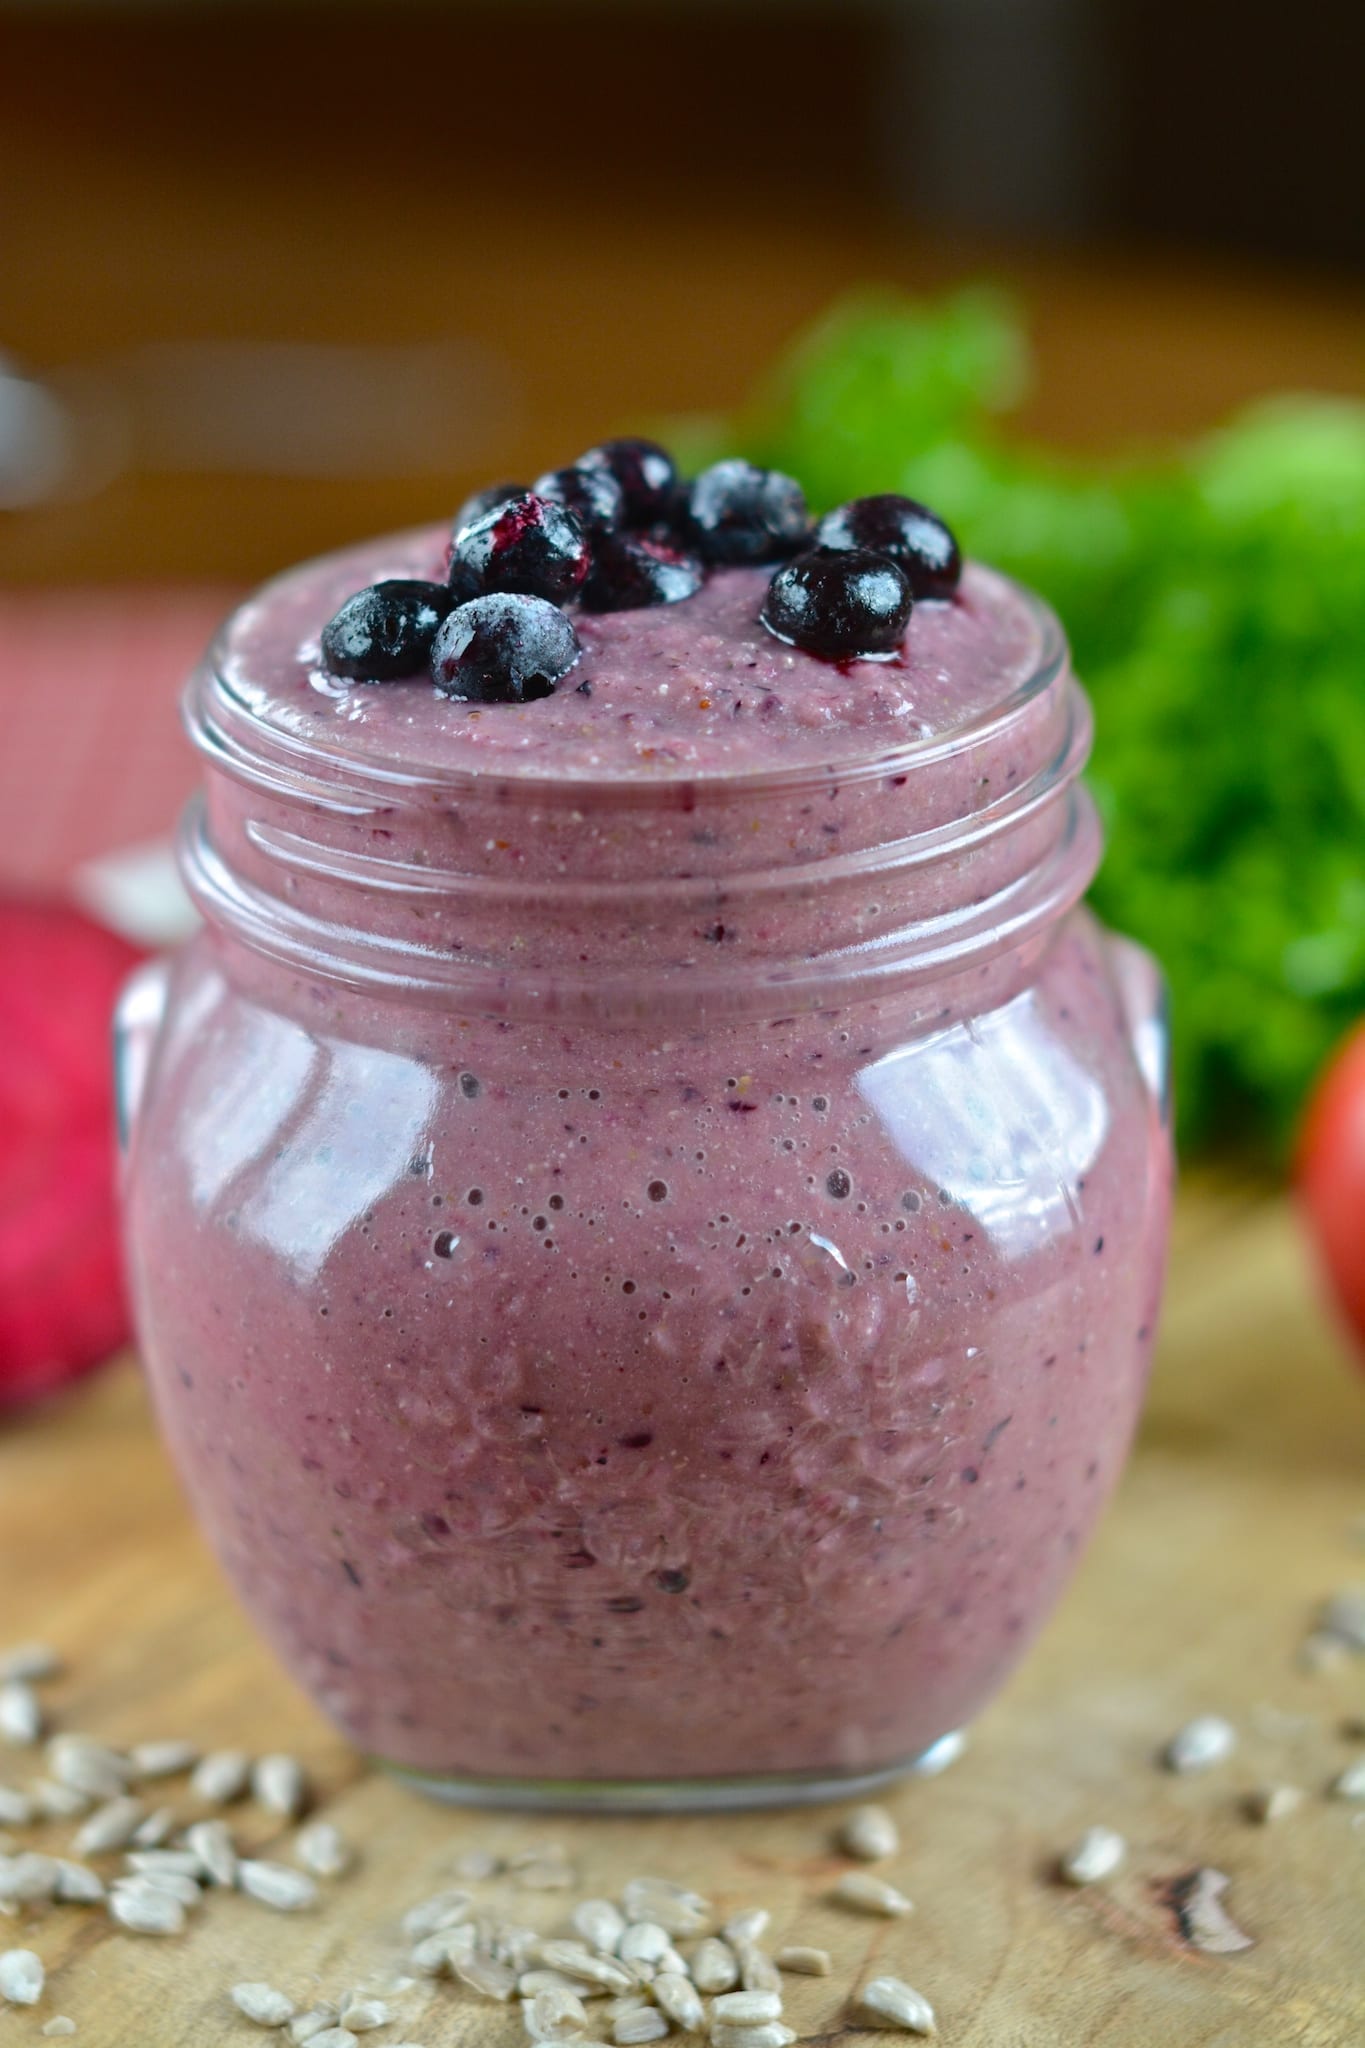 Beetroot Smoothie with Blueberries [Gluten-Free and Sugar-Free]